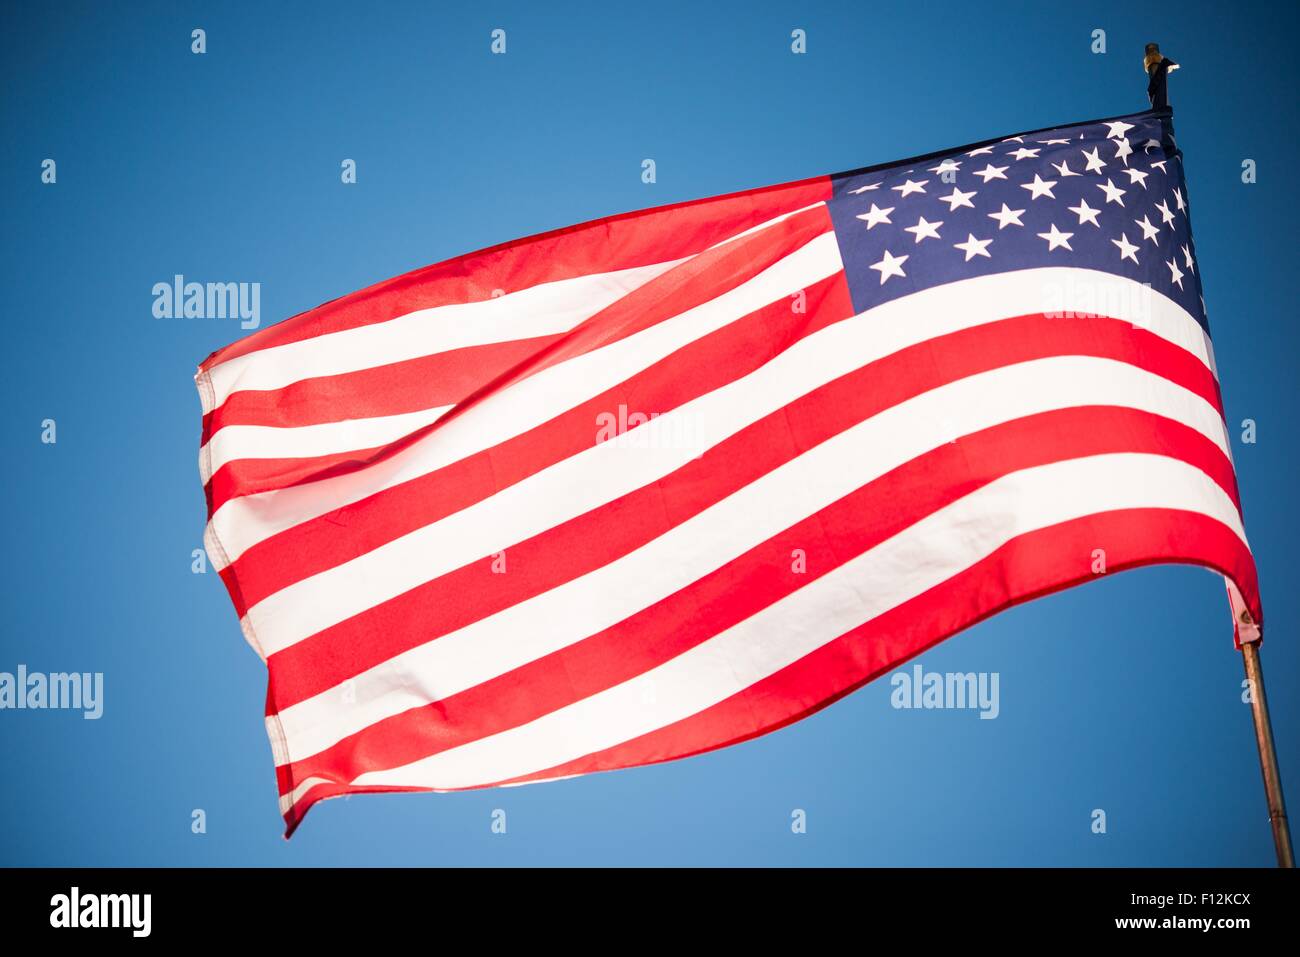 United States of America Flag. American Flag on Wind. Stock Photo